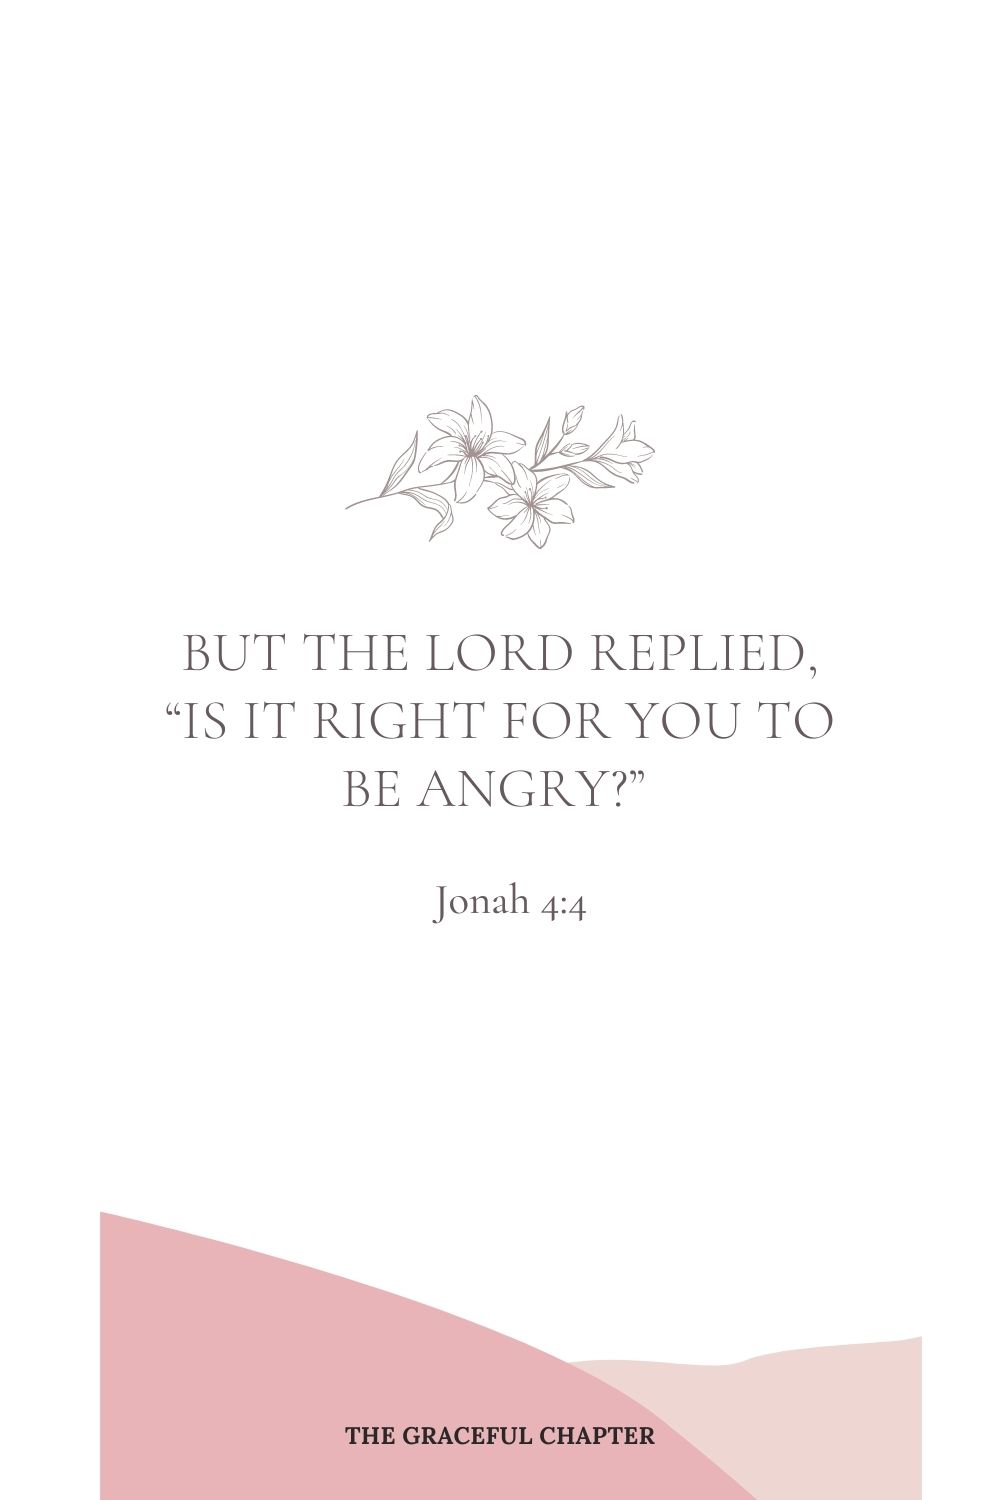 But the Lord replied, “Is it right for you to be angry?”  Jonah 4:4